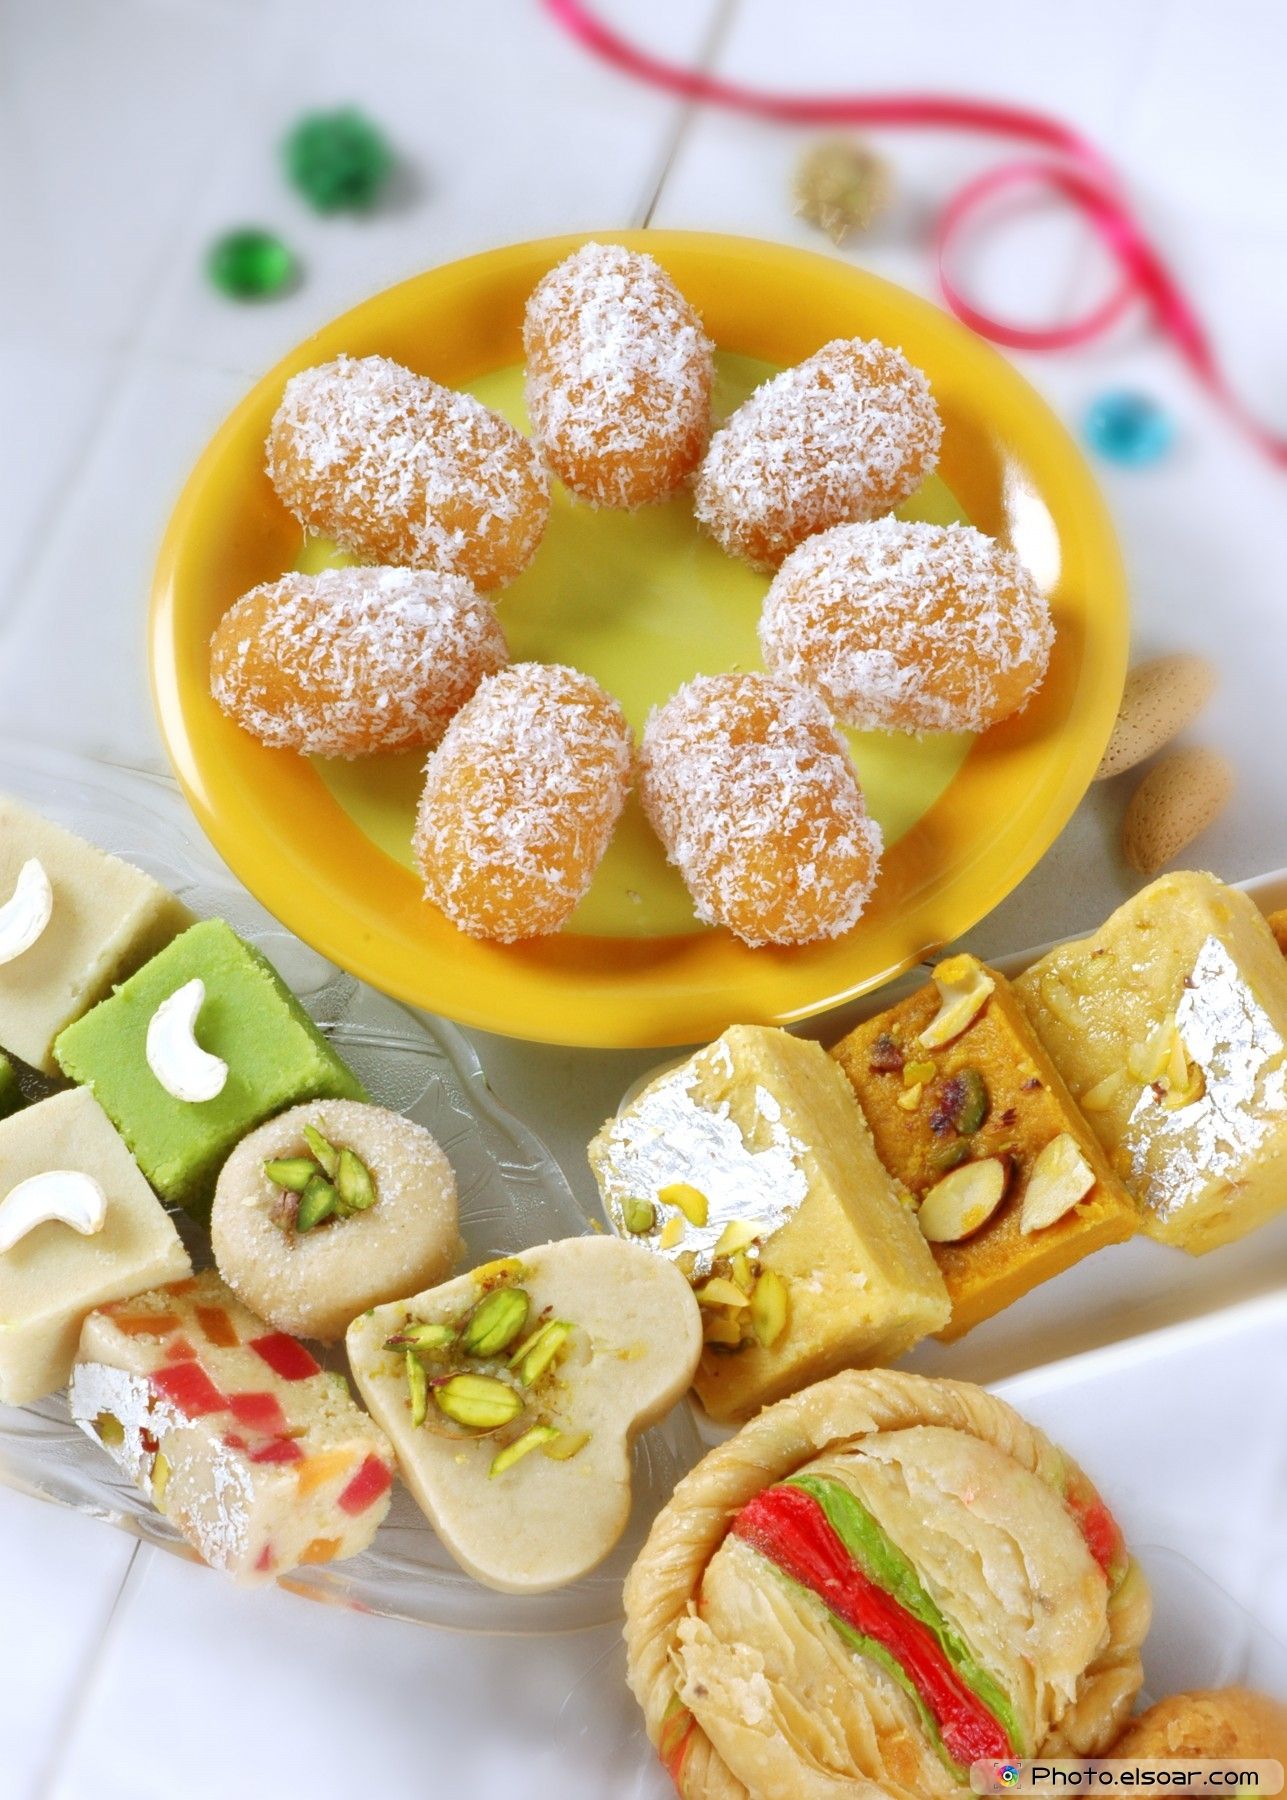 Delicious Indian Sweets. In Picture